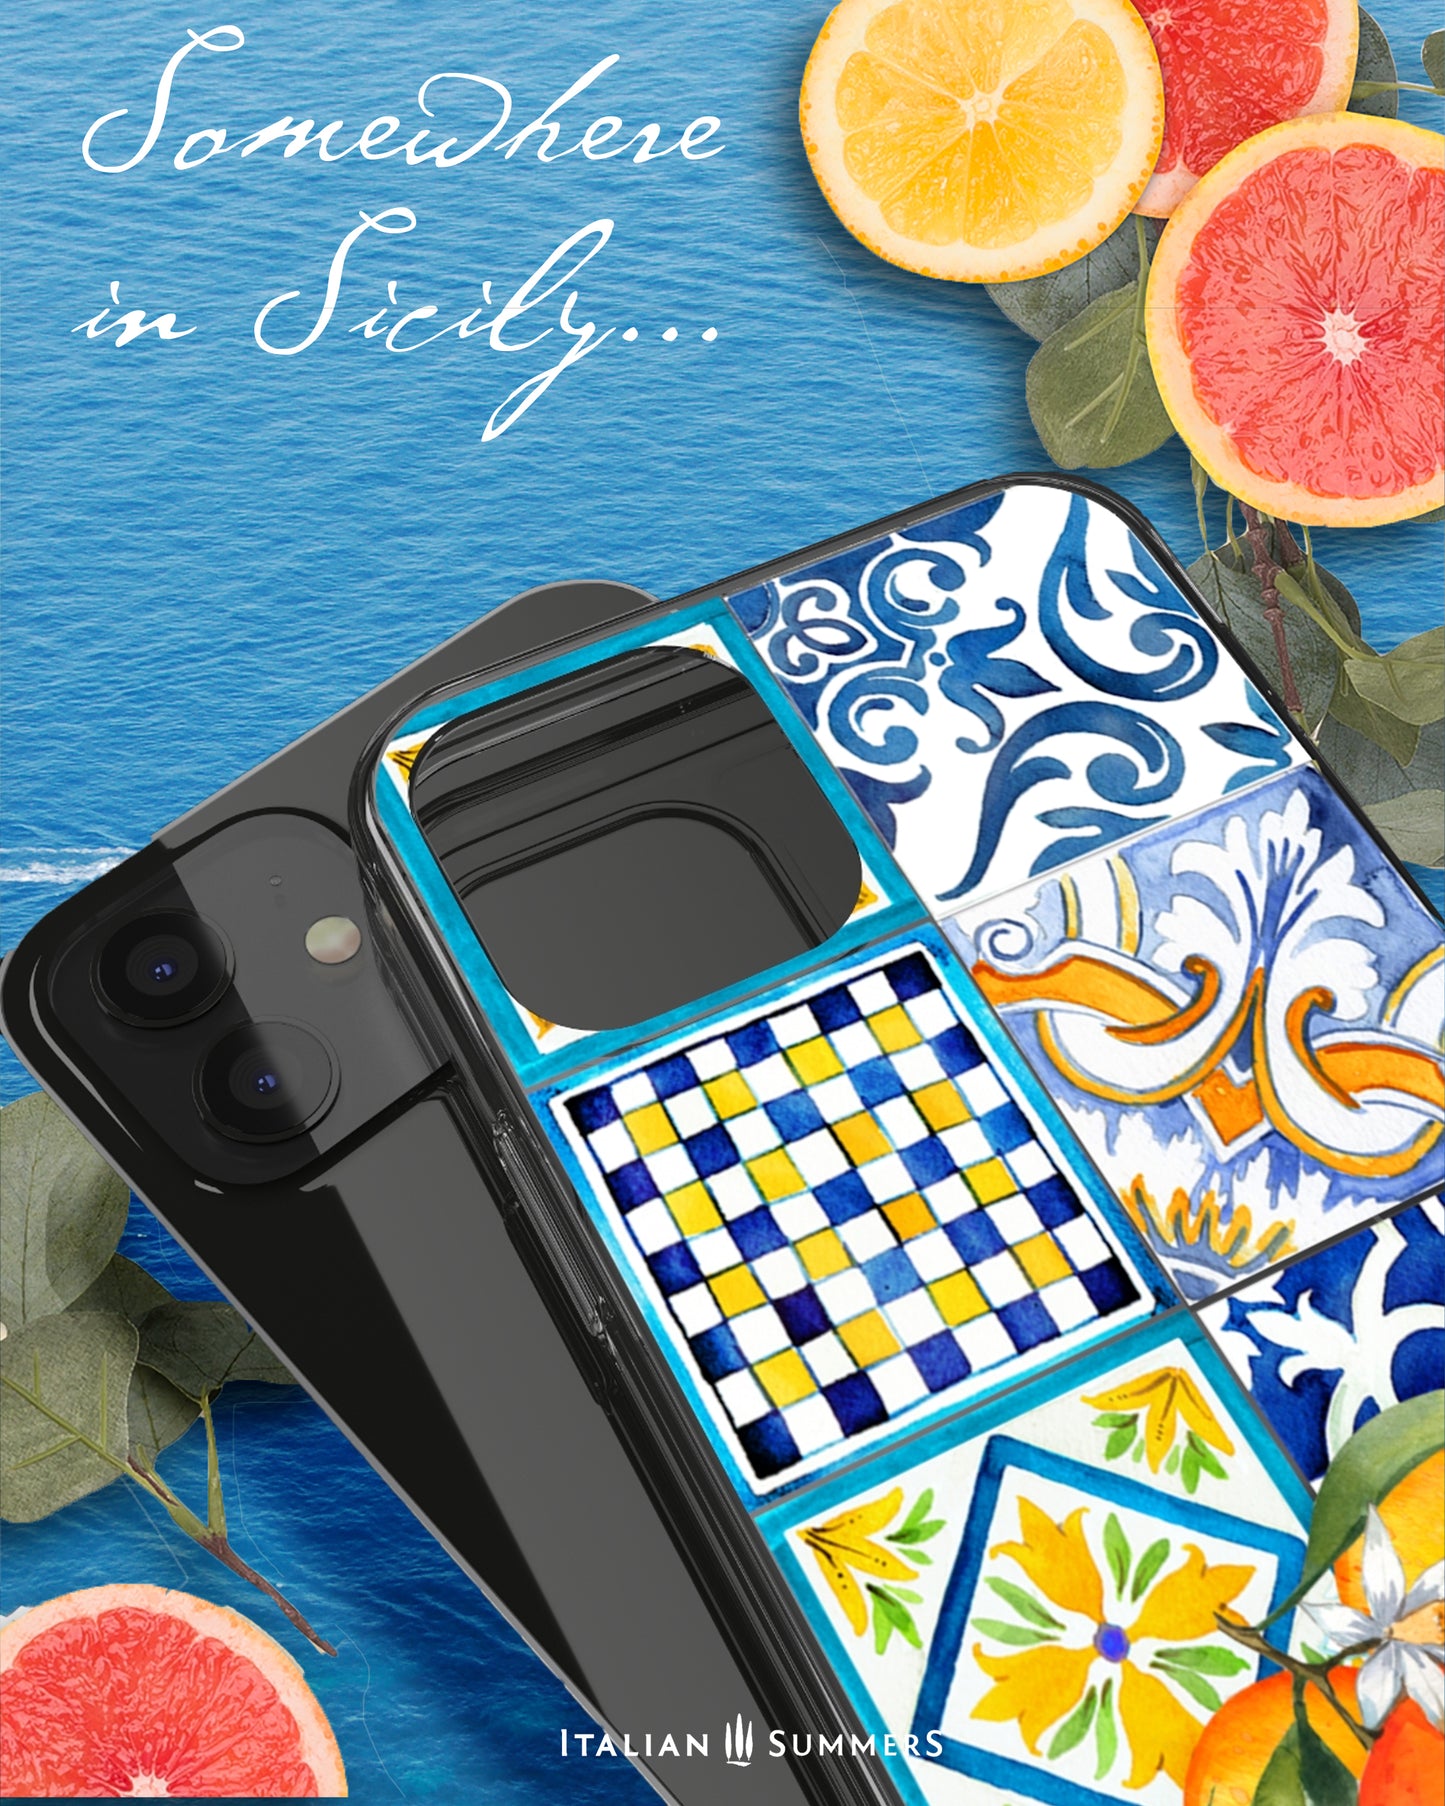 A colorful printed phone cover is shown covered with a bright pattern of Italian Maiolica tiles. The azure waters of the Mediterranean Sea are visible in the background. 